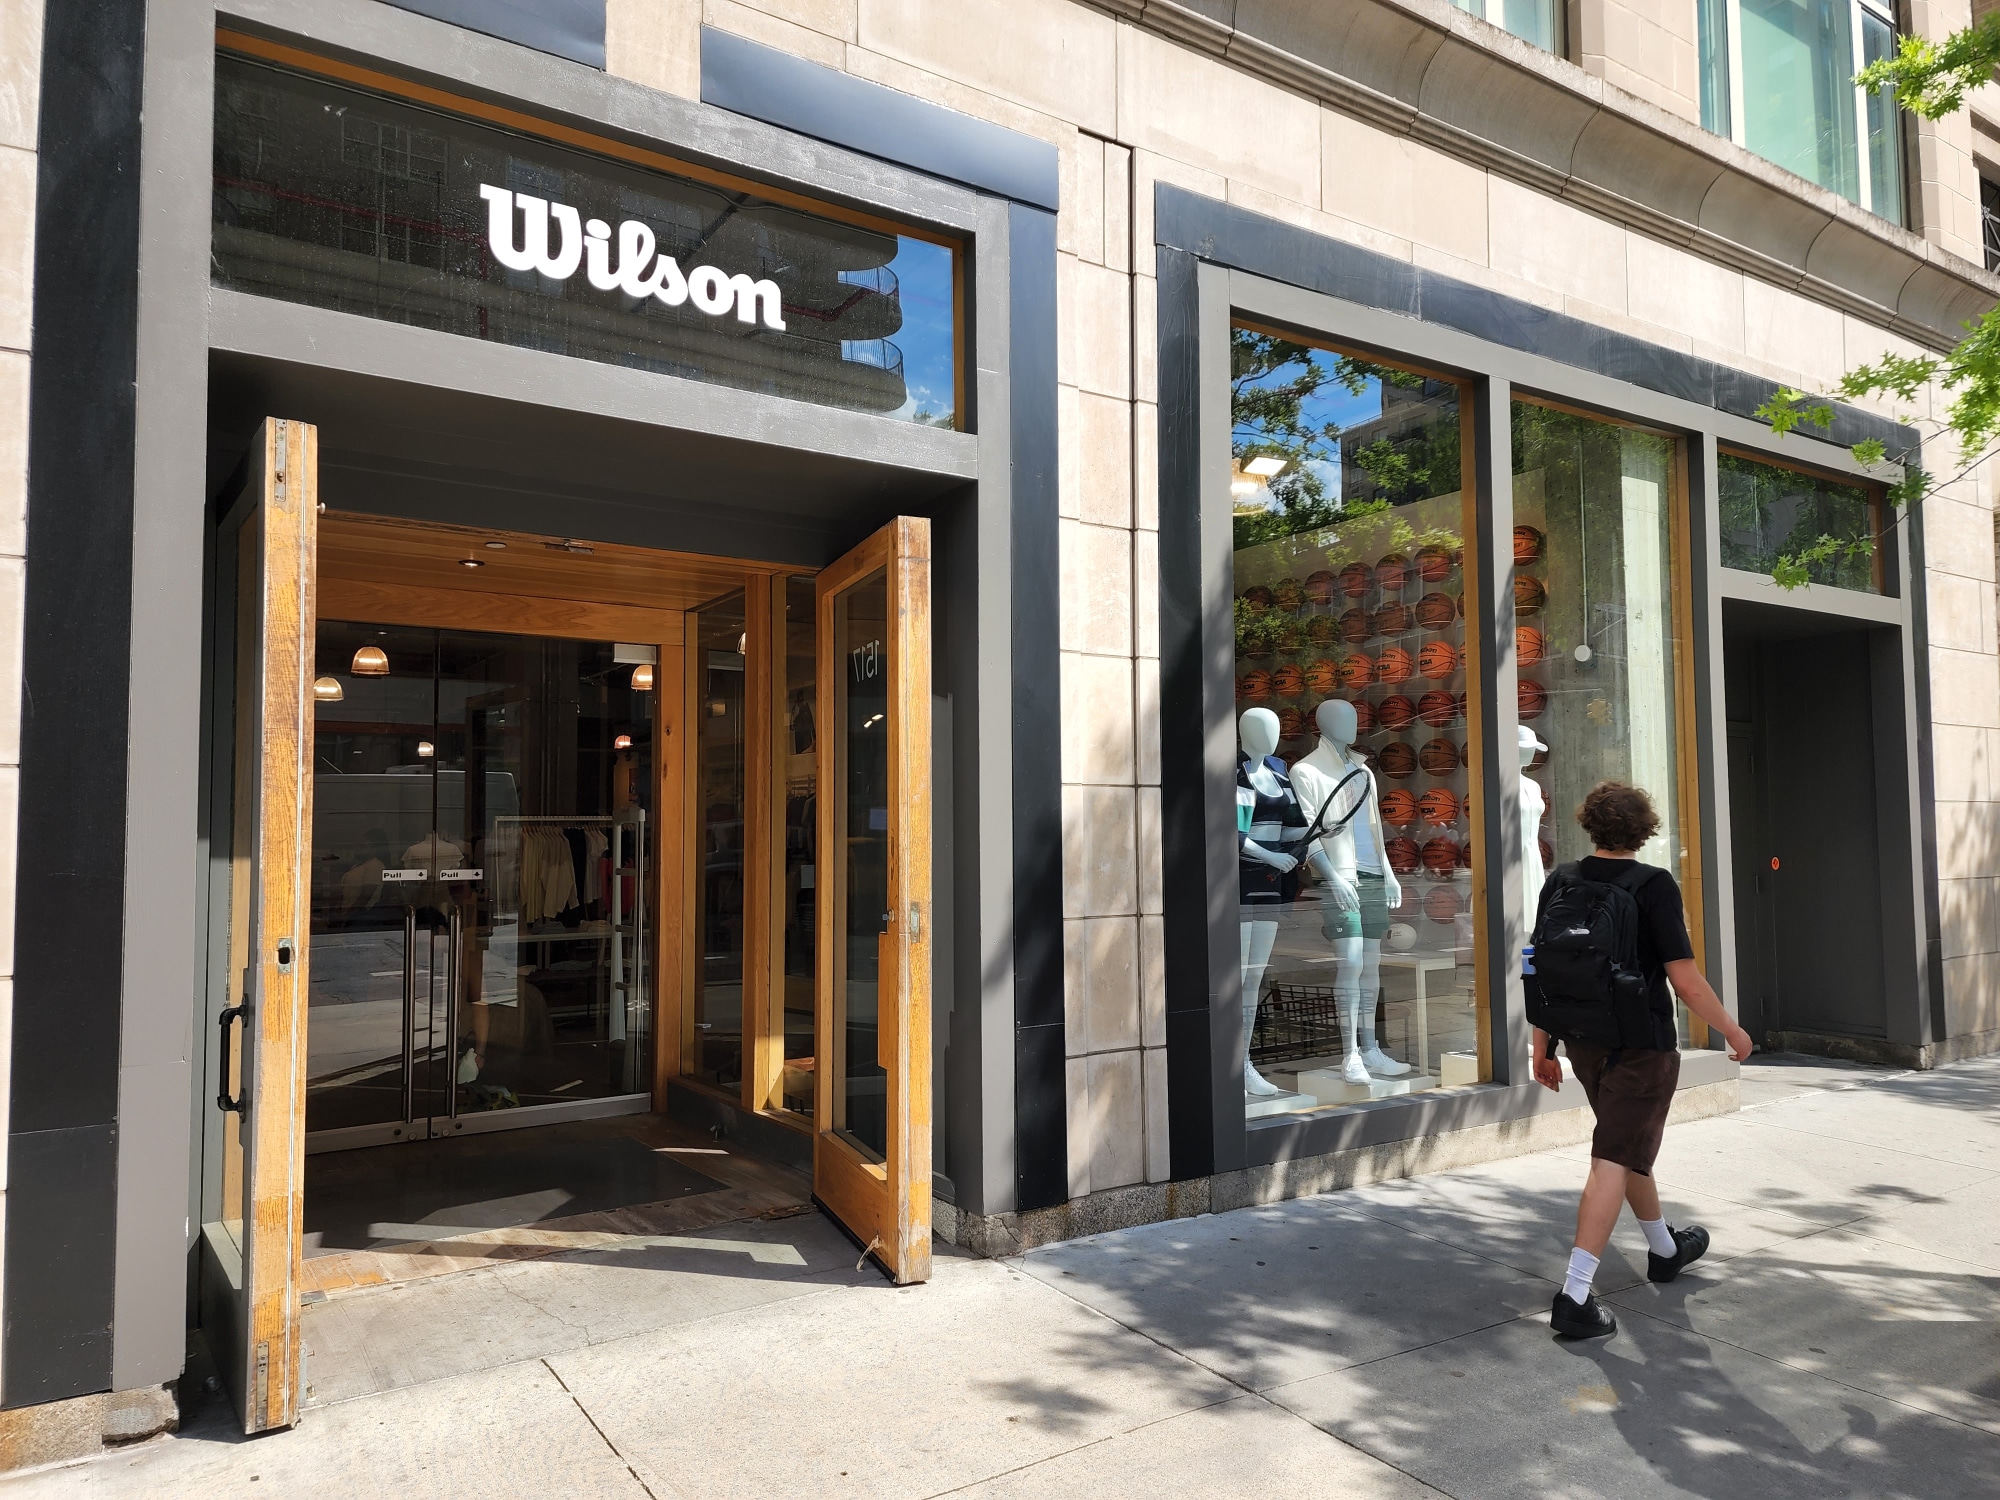 Wilson Sporting Goods is now open on Third Avenue between East 85th and 86th Streets